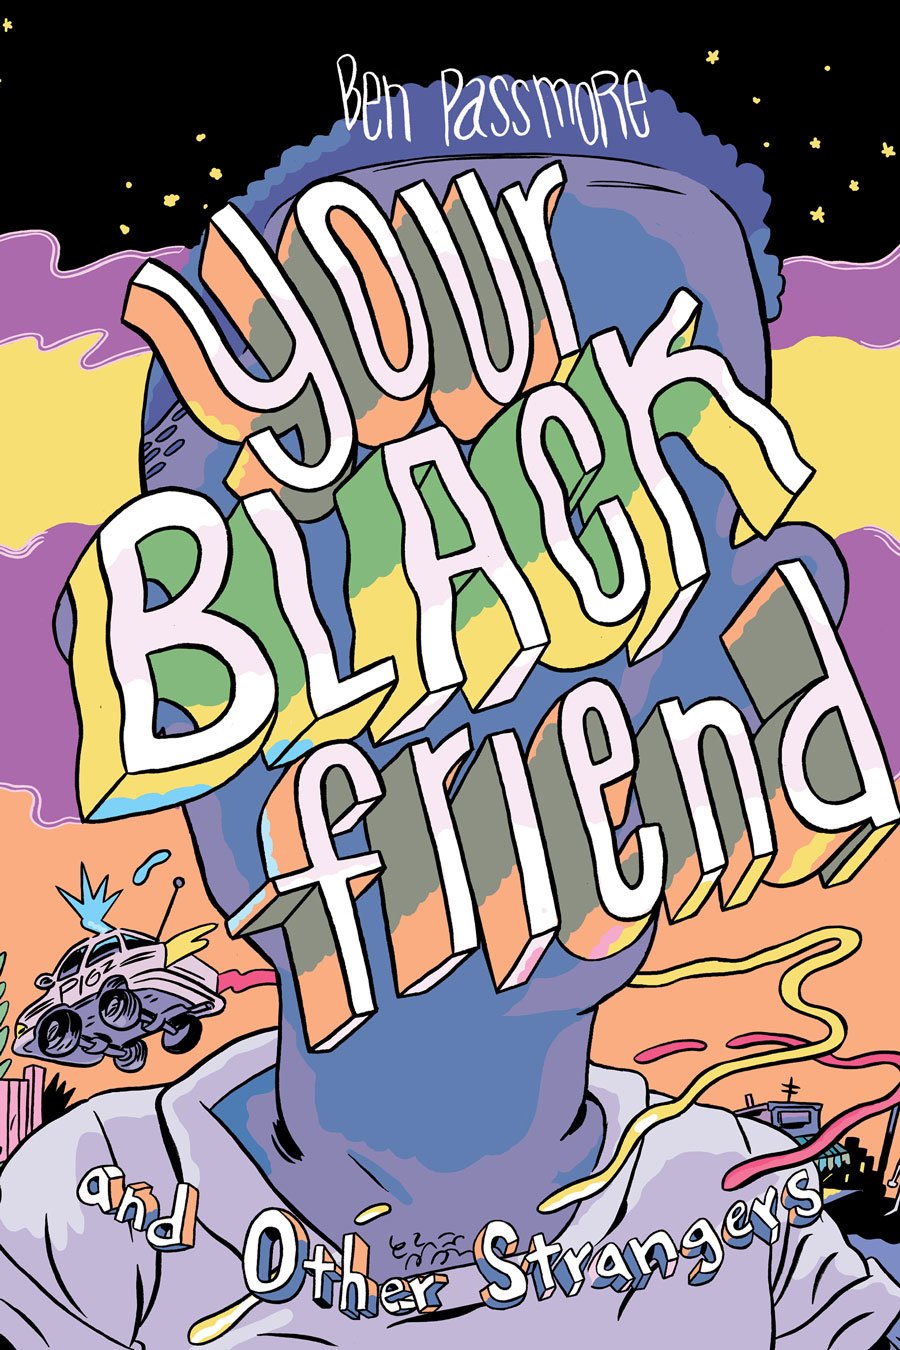 The 100 Best Comics of the Decade: Your Black Friend and Other Strangers